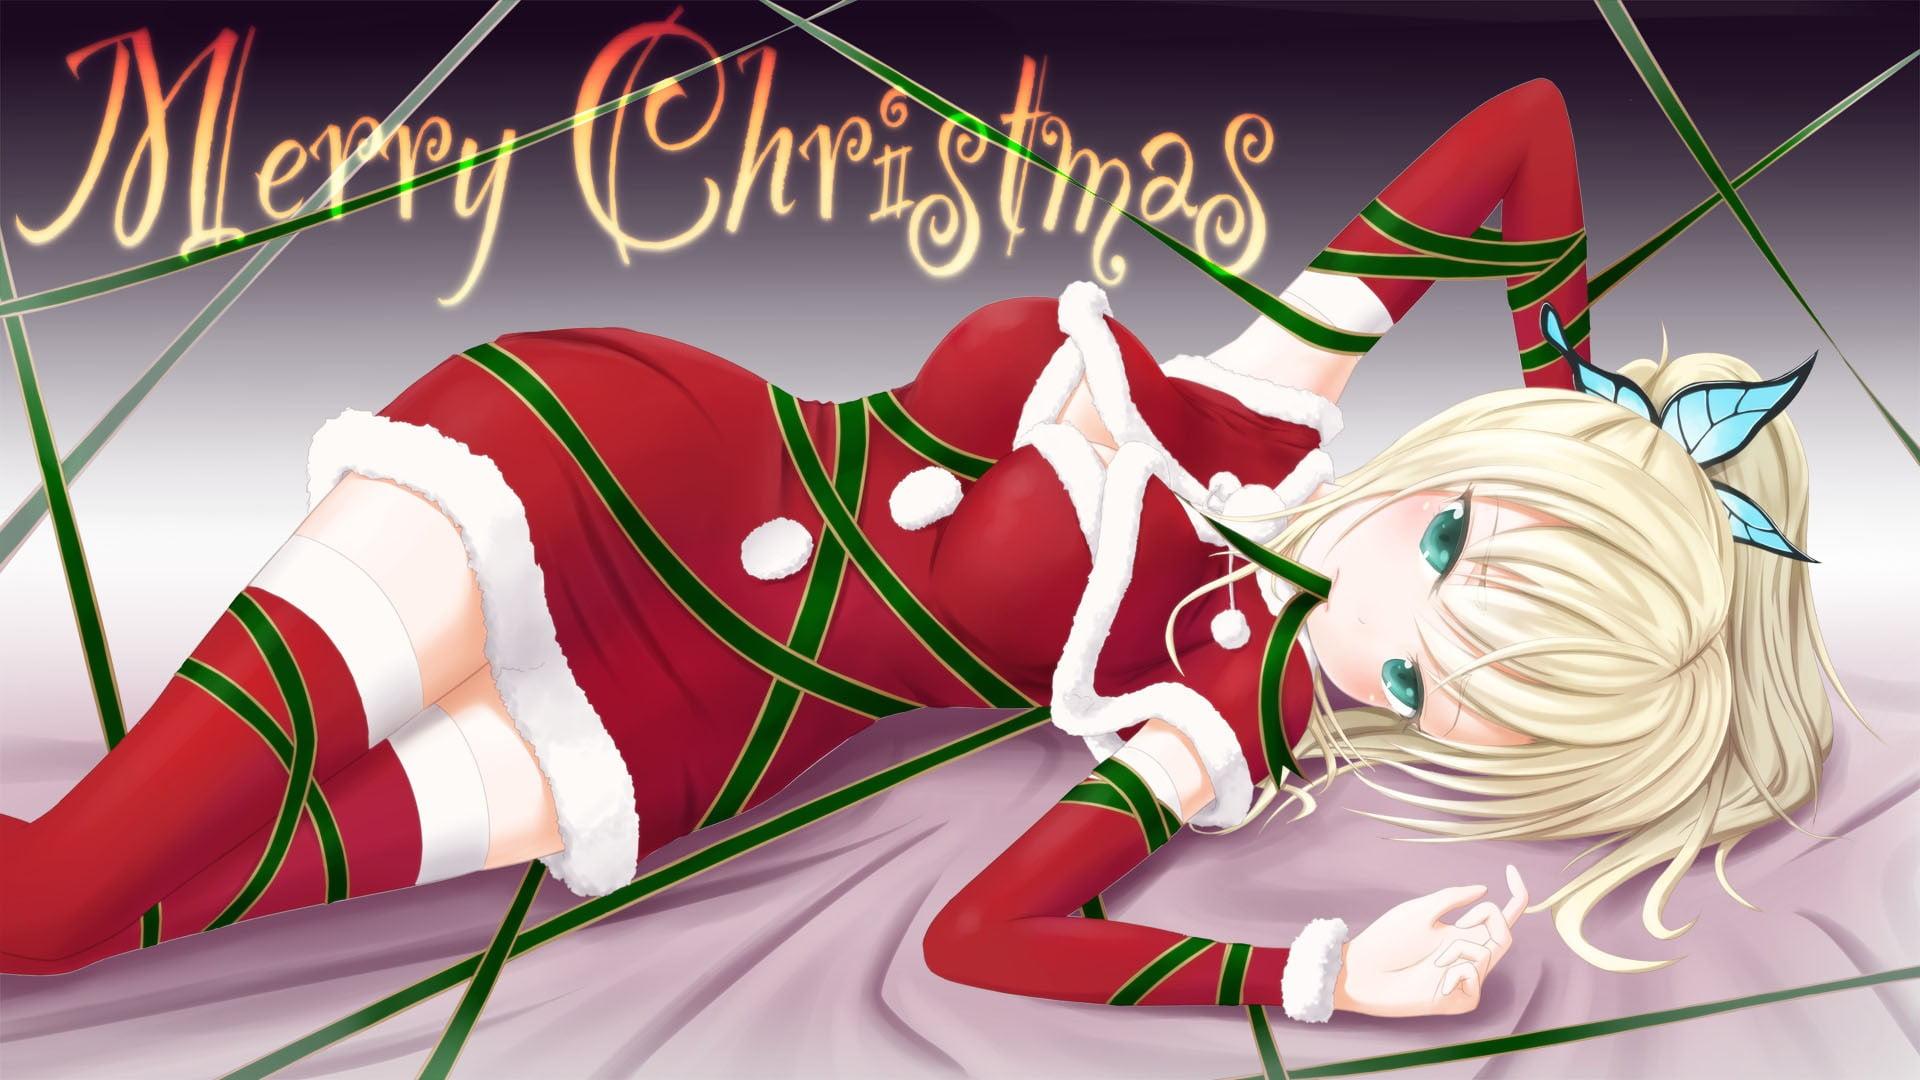 Female Anime Character Illustration With Merry Christmas Text Overlay, Knee Highs, Holiday, Blonde, Kashiwazaki Sena HD Wallpaper